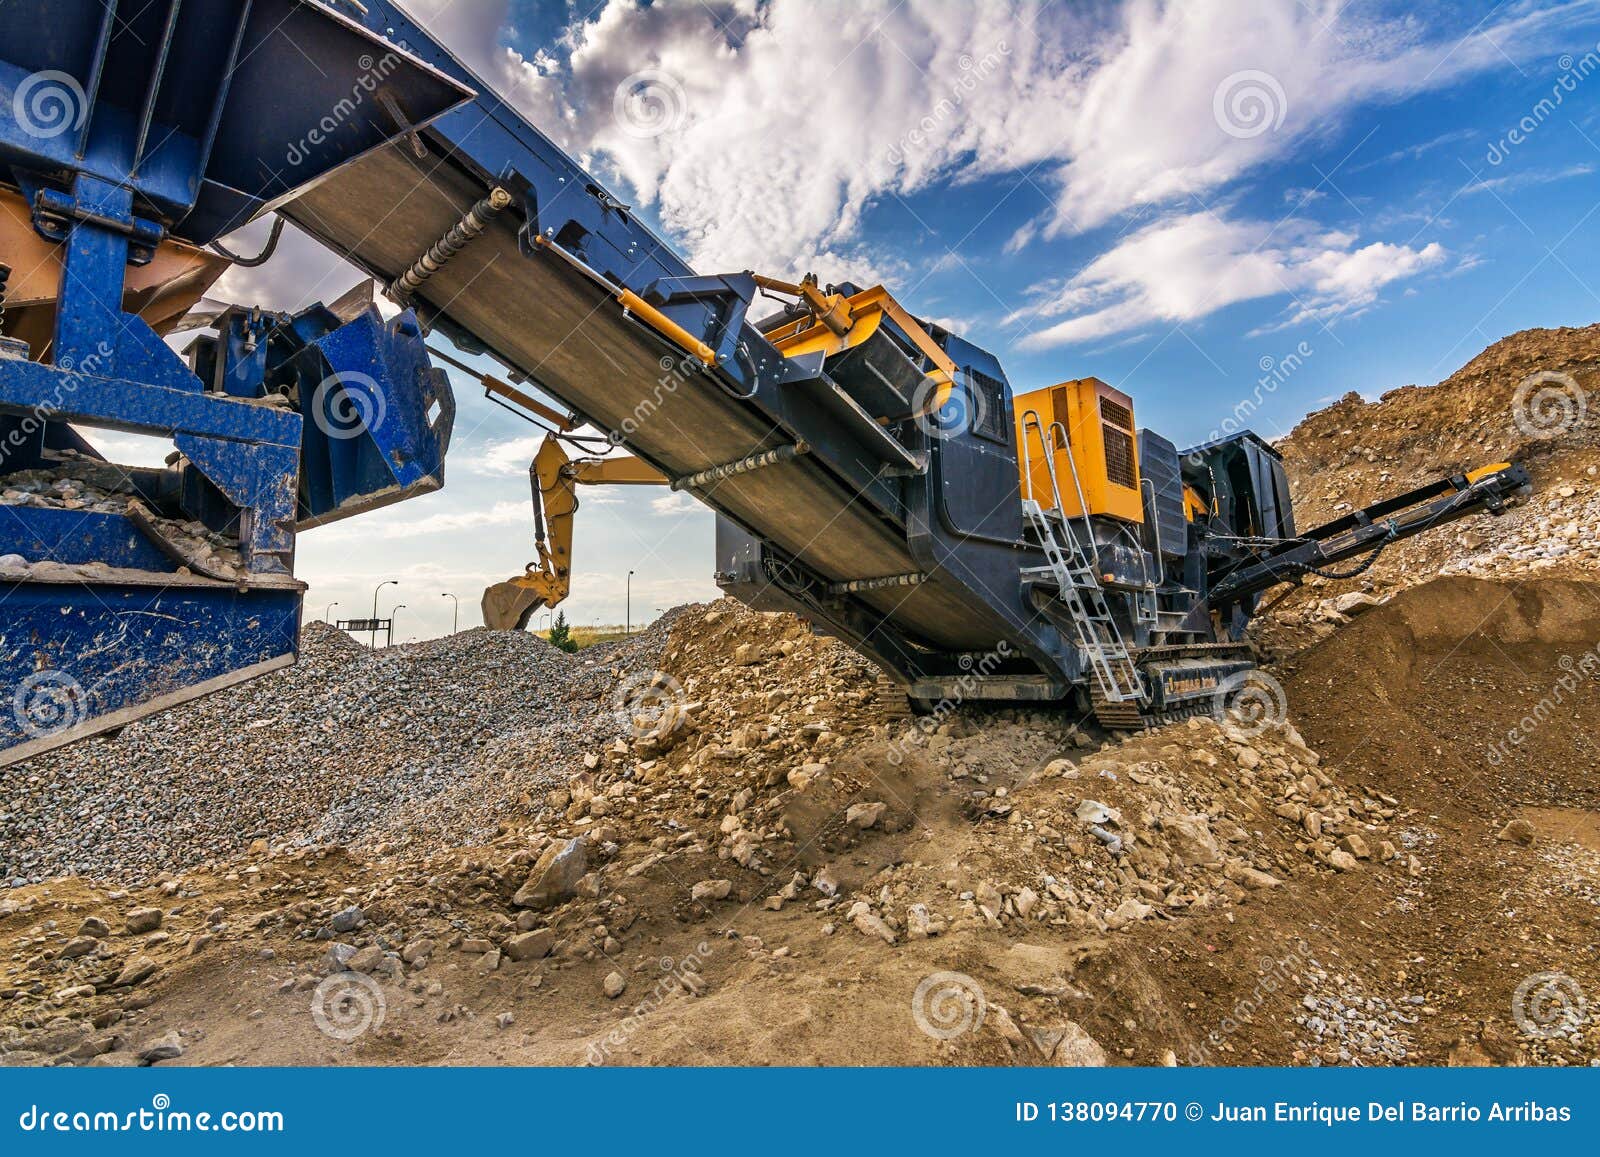 mechanical conveyor belt to pulverize rock and stone and generate gravel